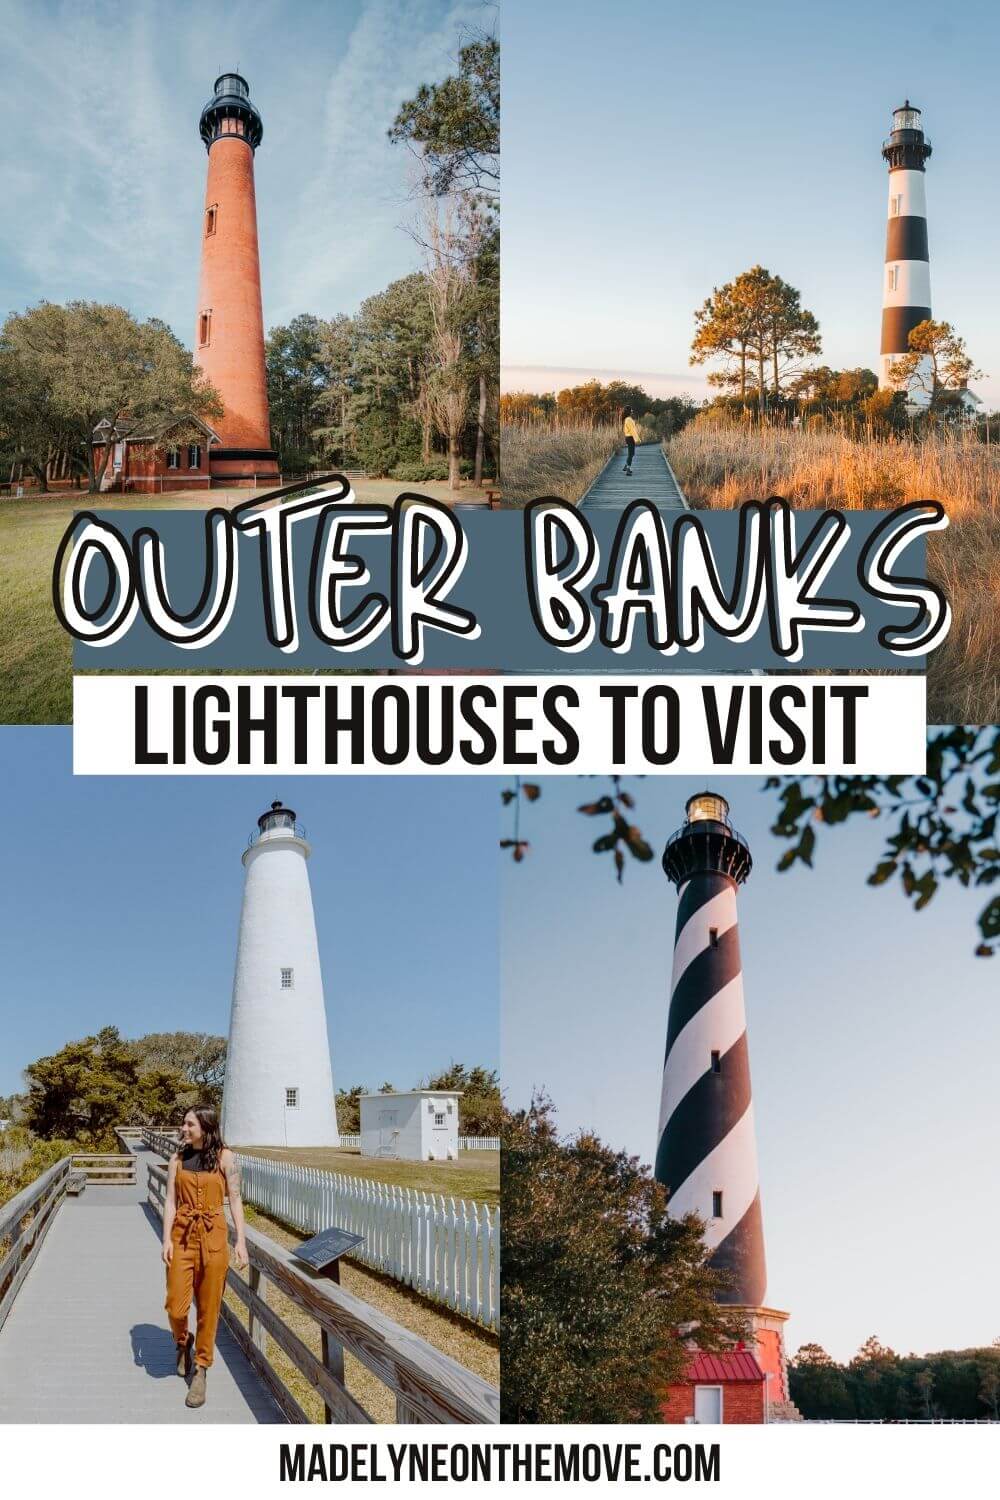 Compilation of four different lighthouses on the Outer Banks